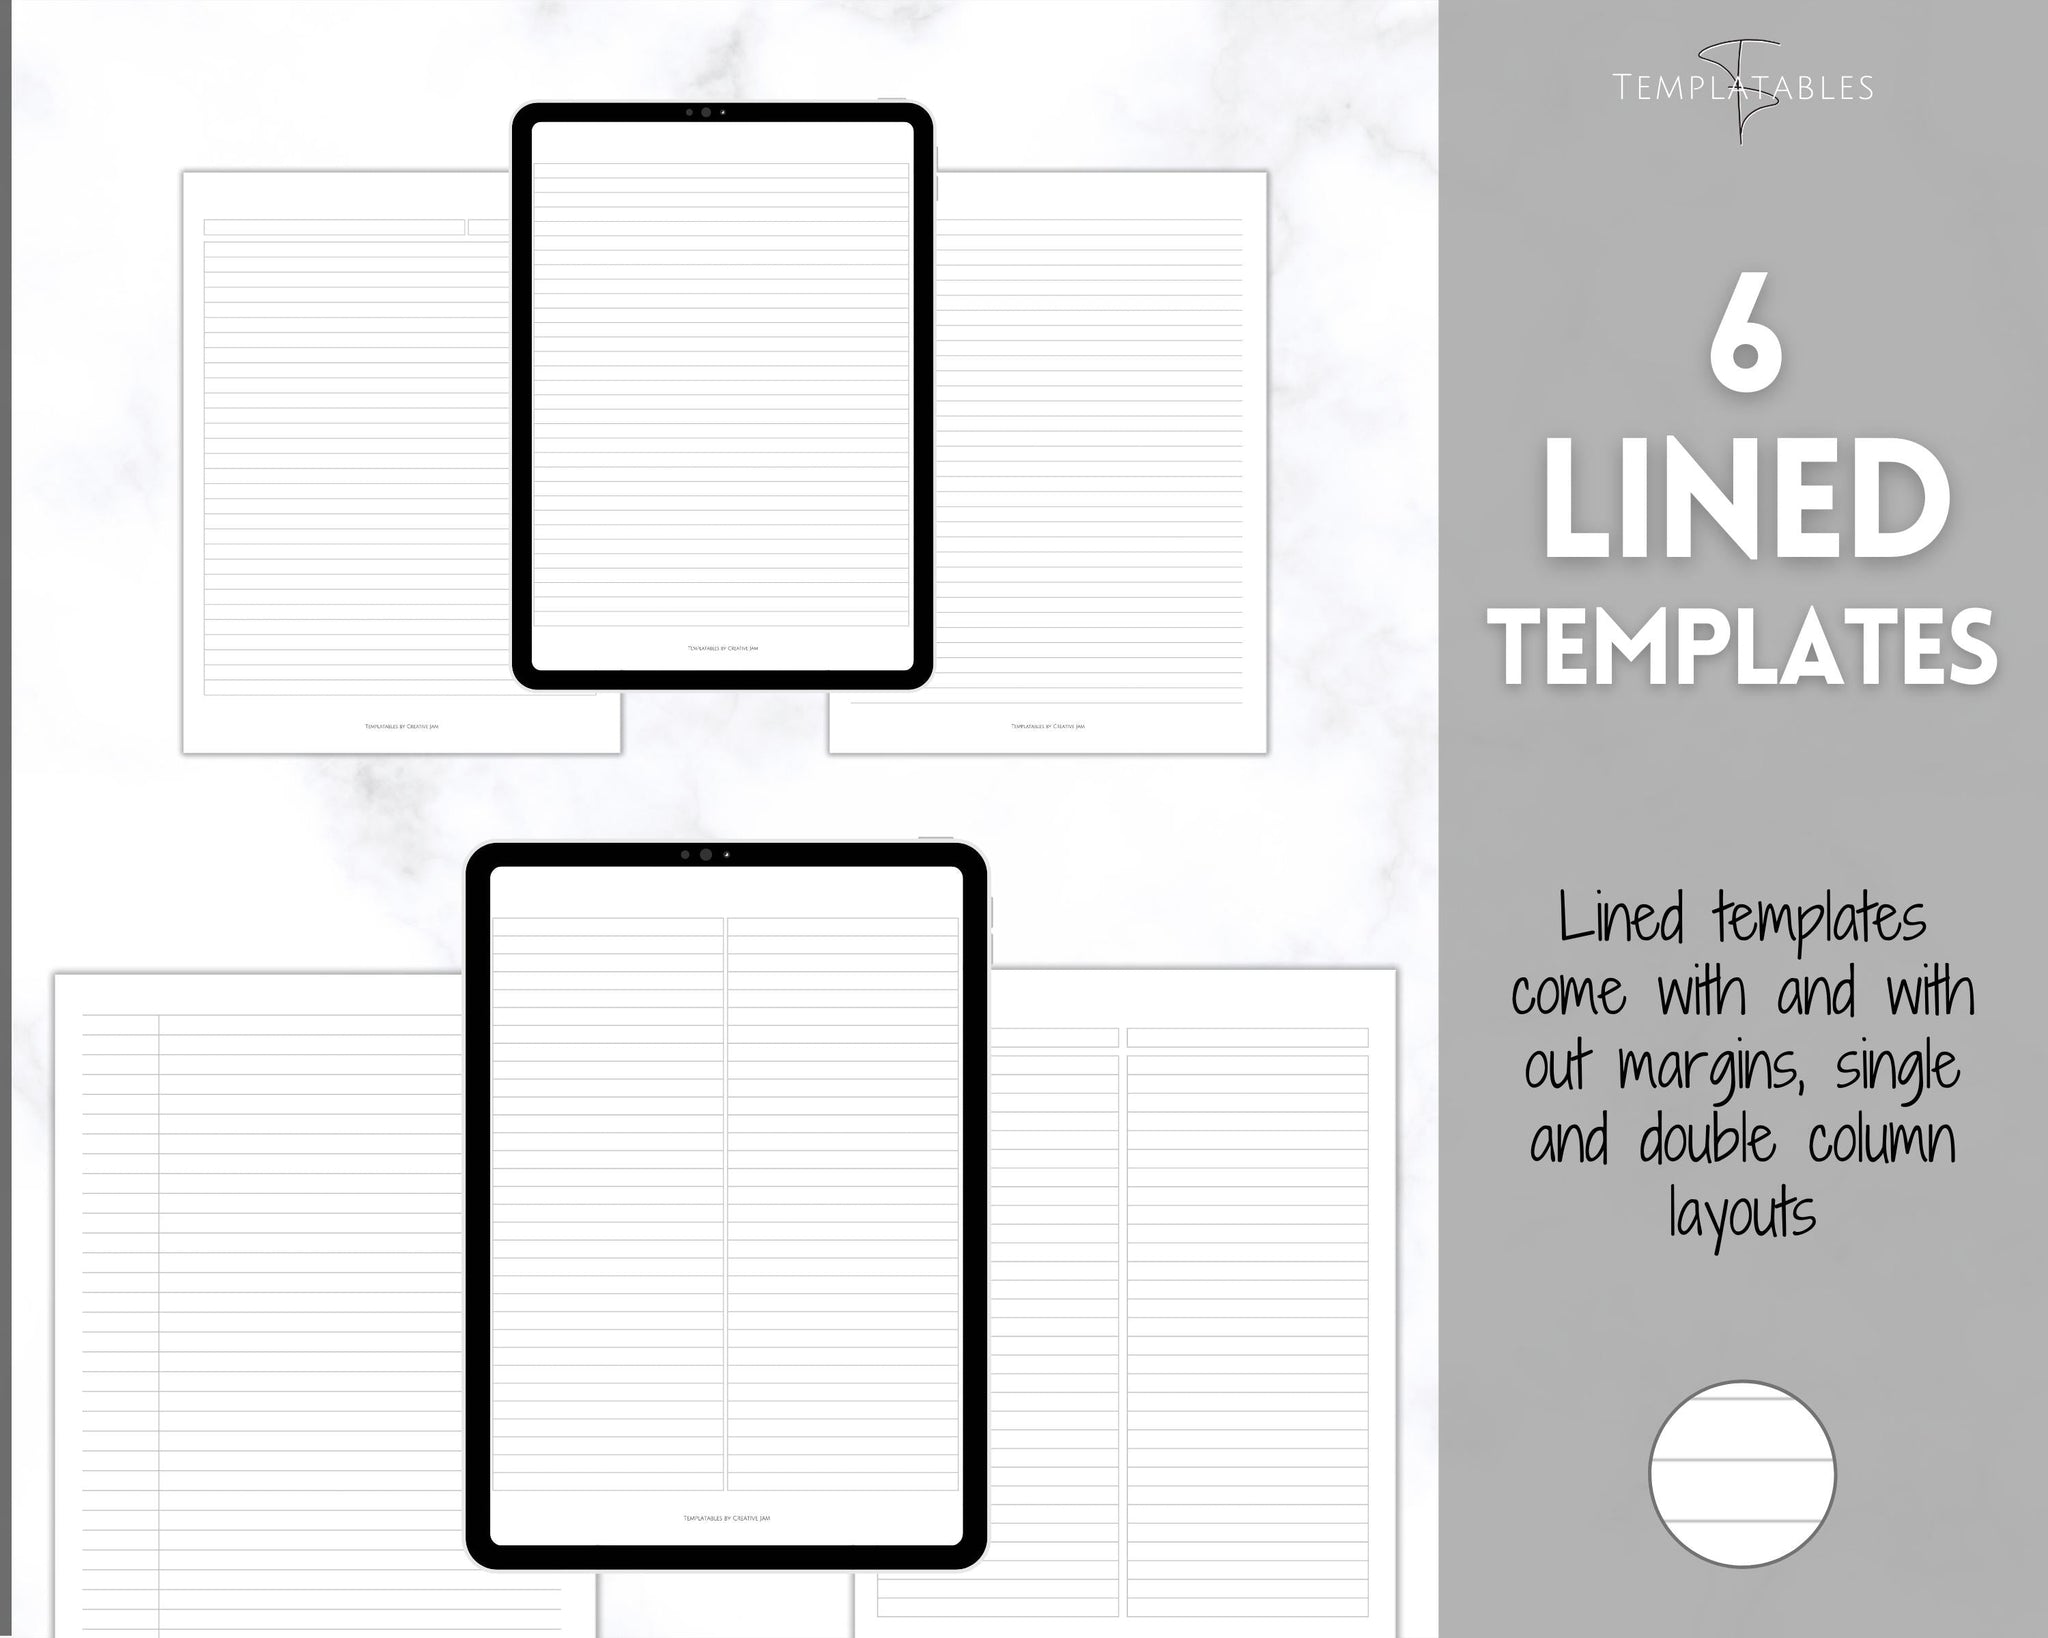 Journal Templates - Make Your Own Journal  Journal template, Writing paper  printable, Printable lined paper